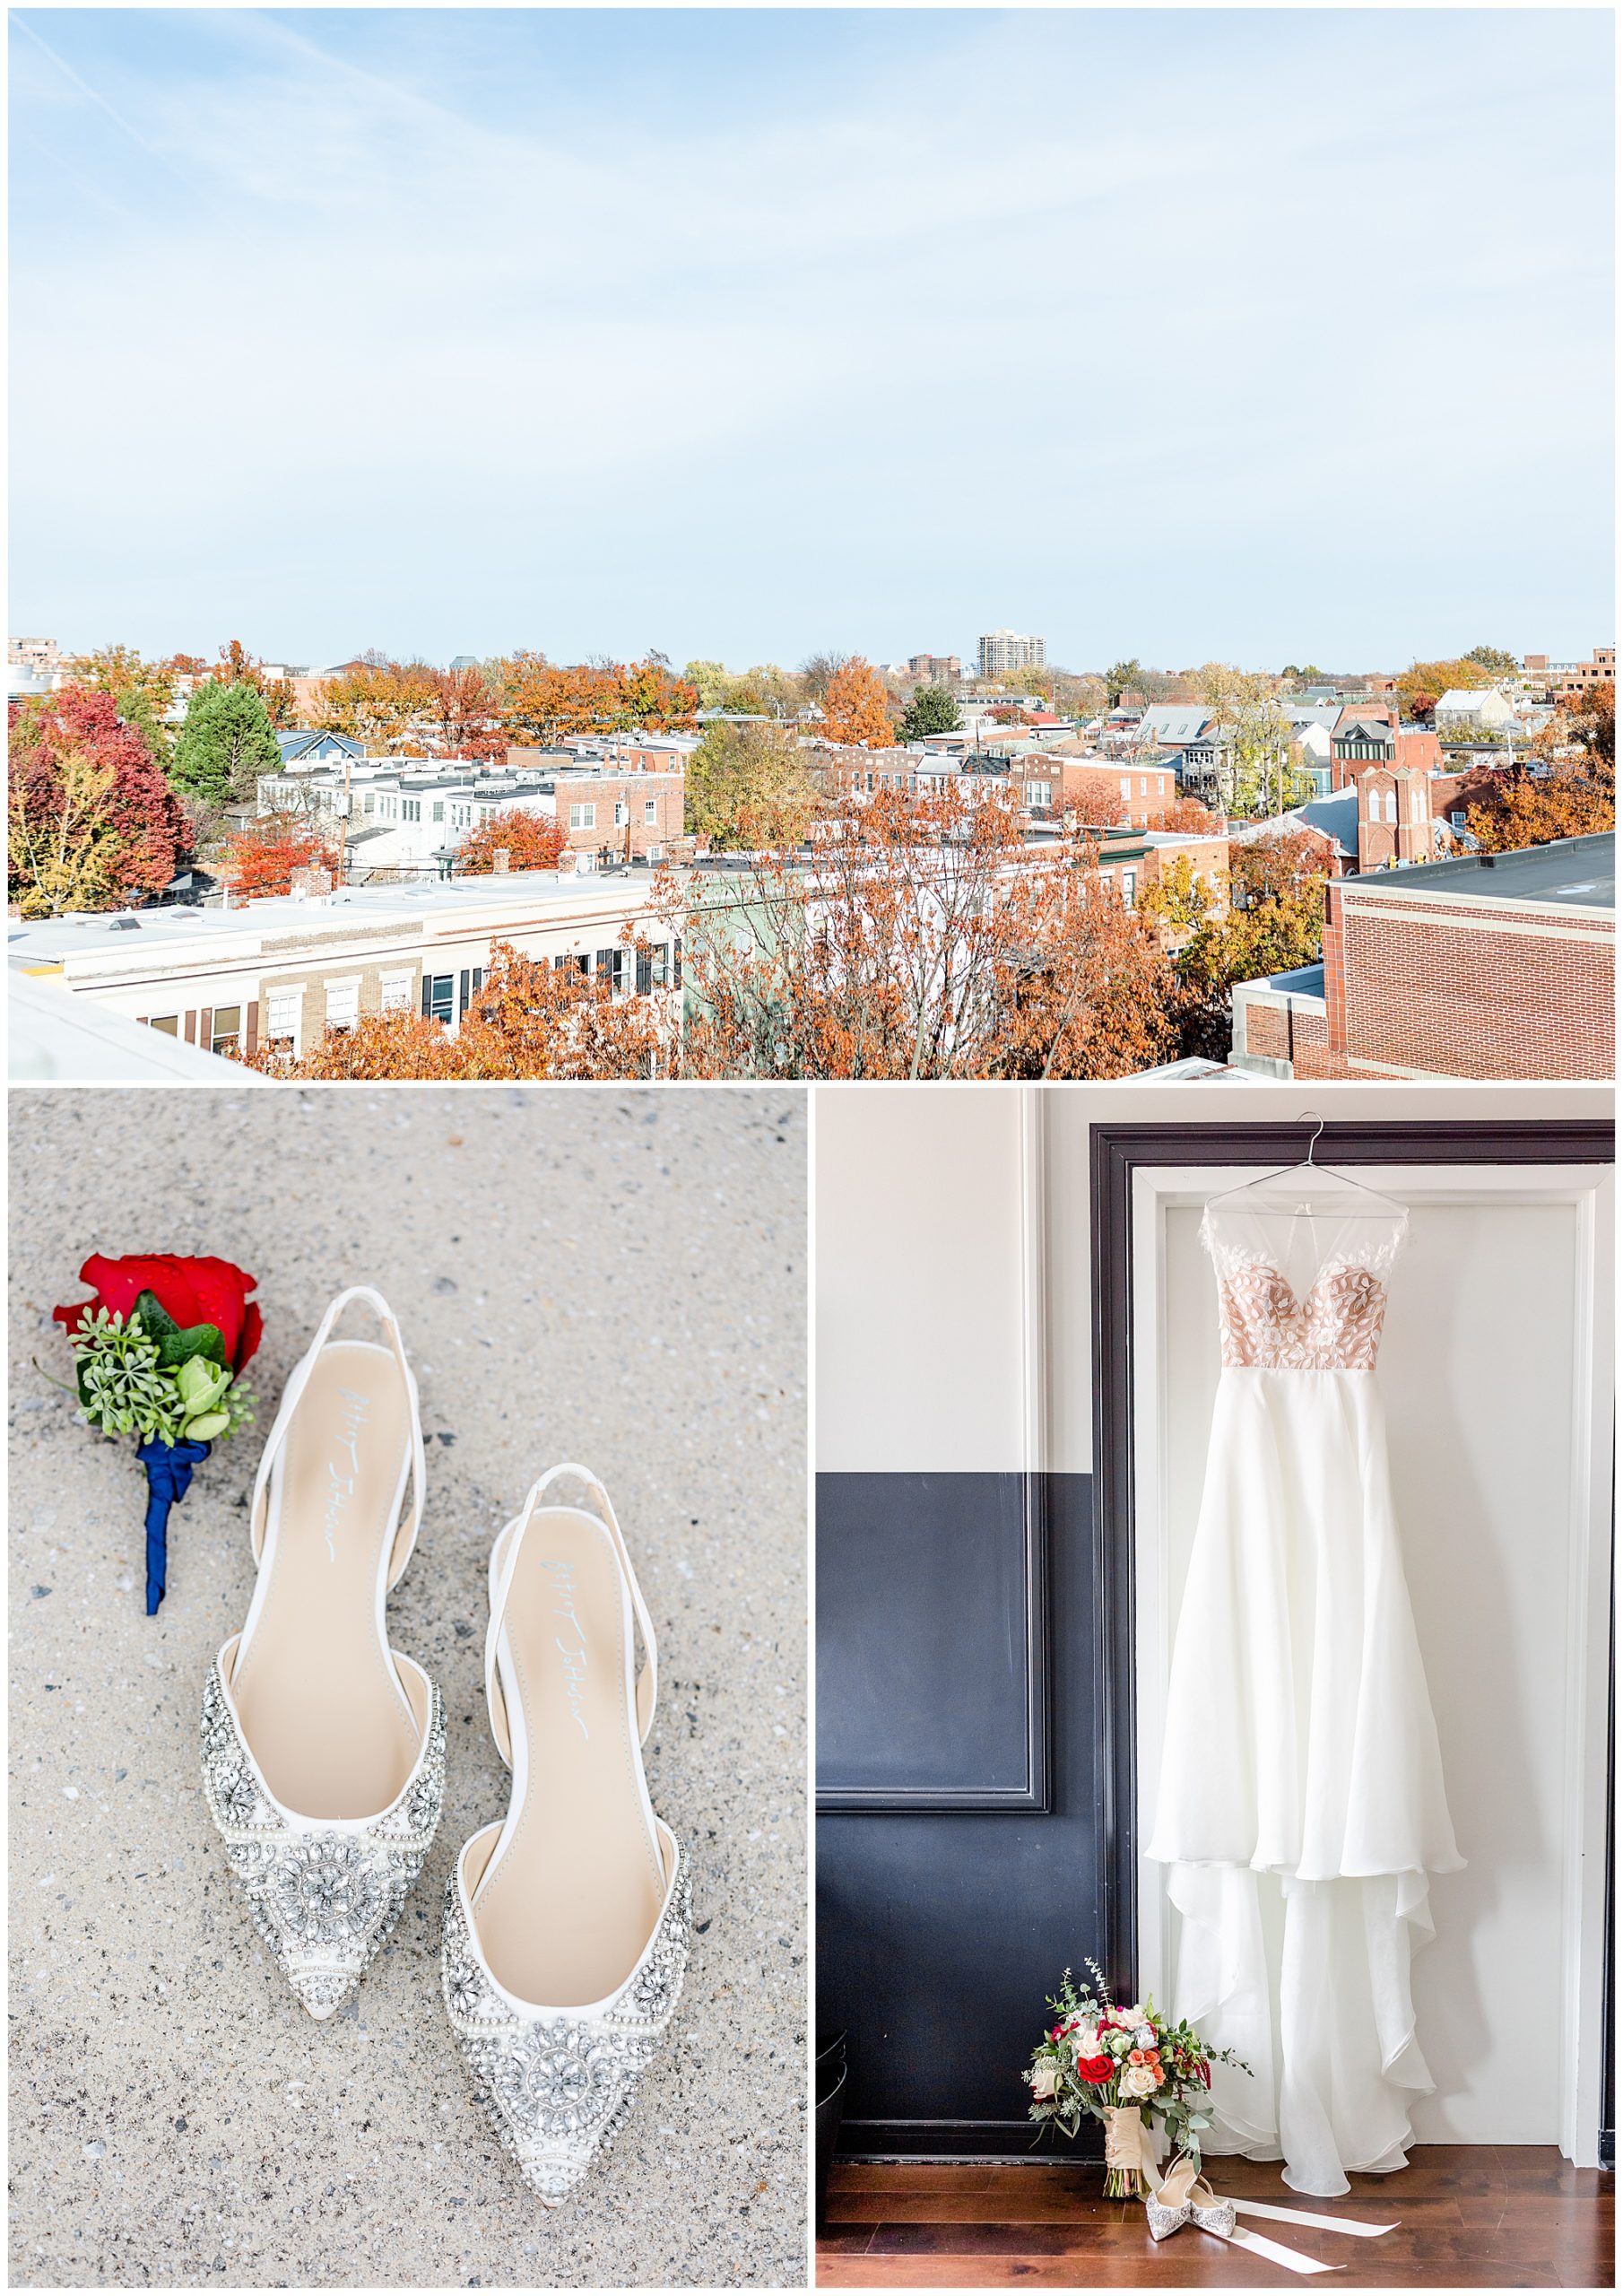 Lorien Alexandria winter wedding, Old Town Alexandria wedding, Alexandria Virginia wedding, DC micro wedding, northern Virginia wedding photographer, Alexandria Virginia wedding photographer, DC wedding photographer, winter wedding aesthetic, Rachel E.H. Photography, white lace wedding dress, city autumn landscape, red rose corsage, silver stoned shoes